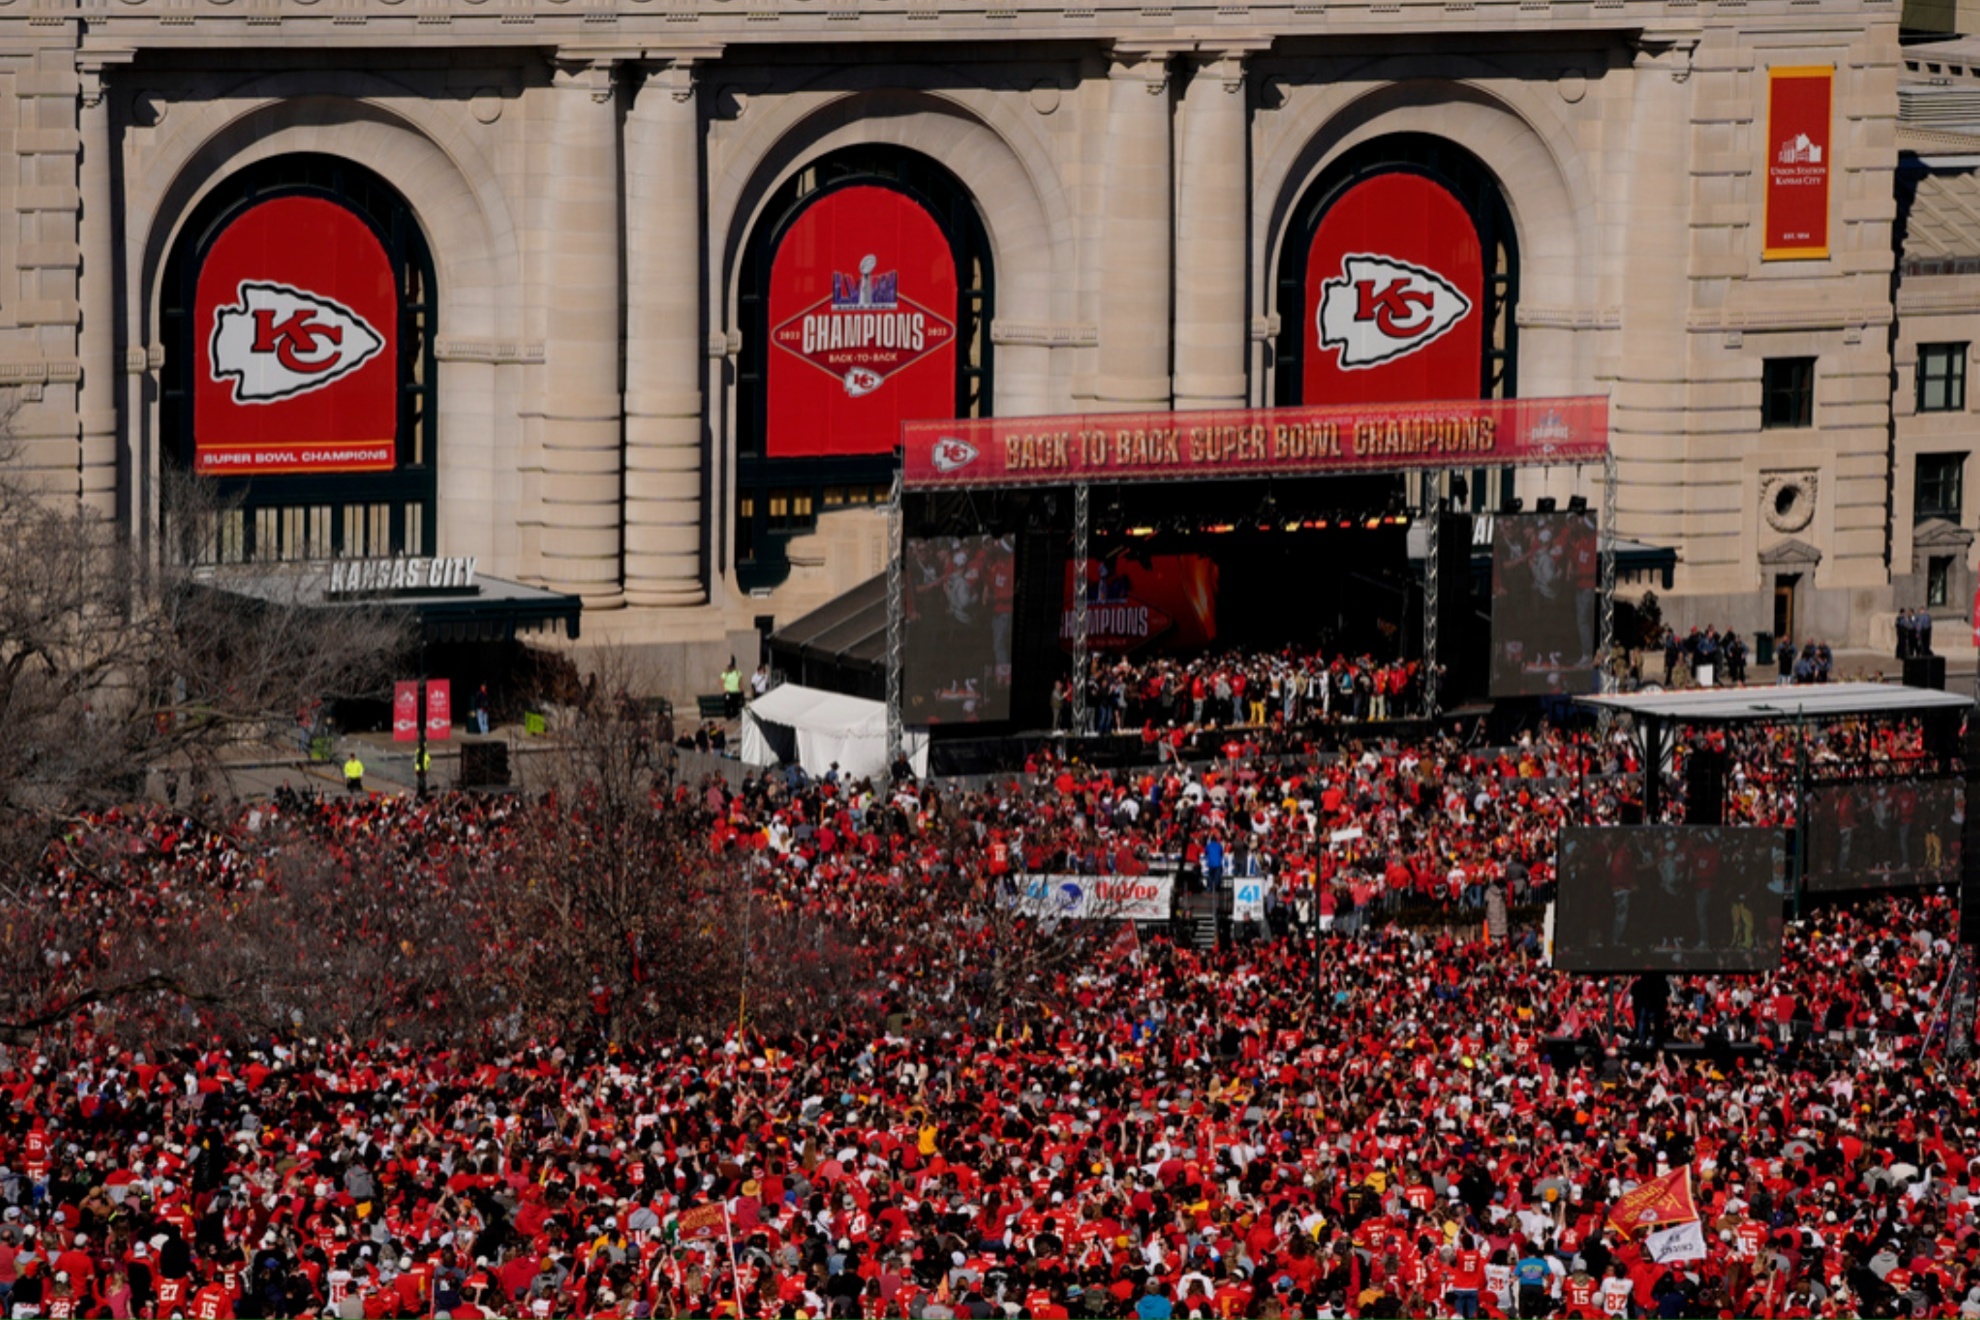 A shooting took place at the end point of the Kansas City Chiefs Super Bowl parade